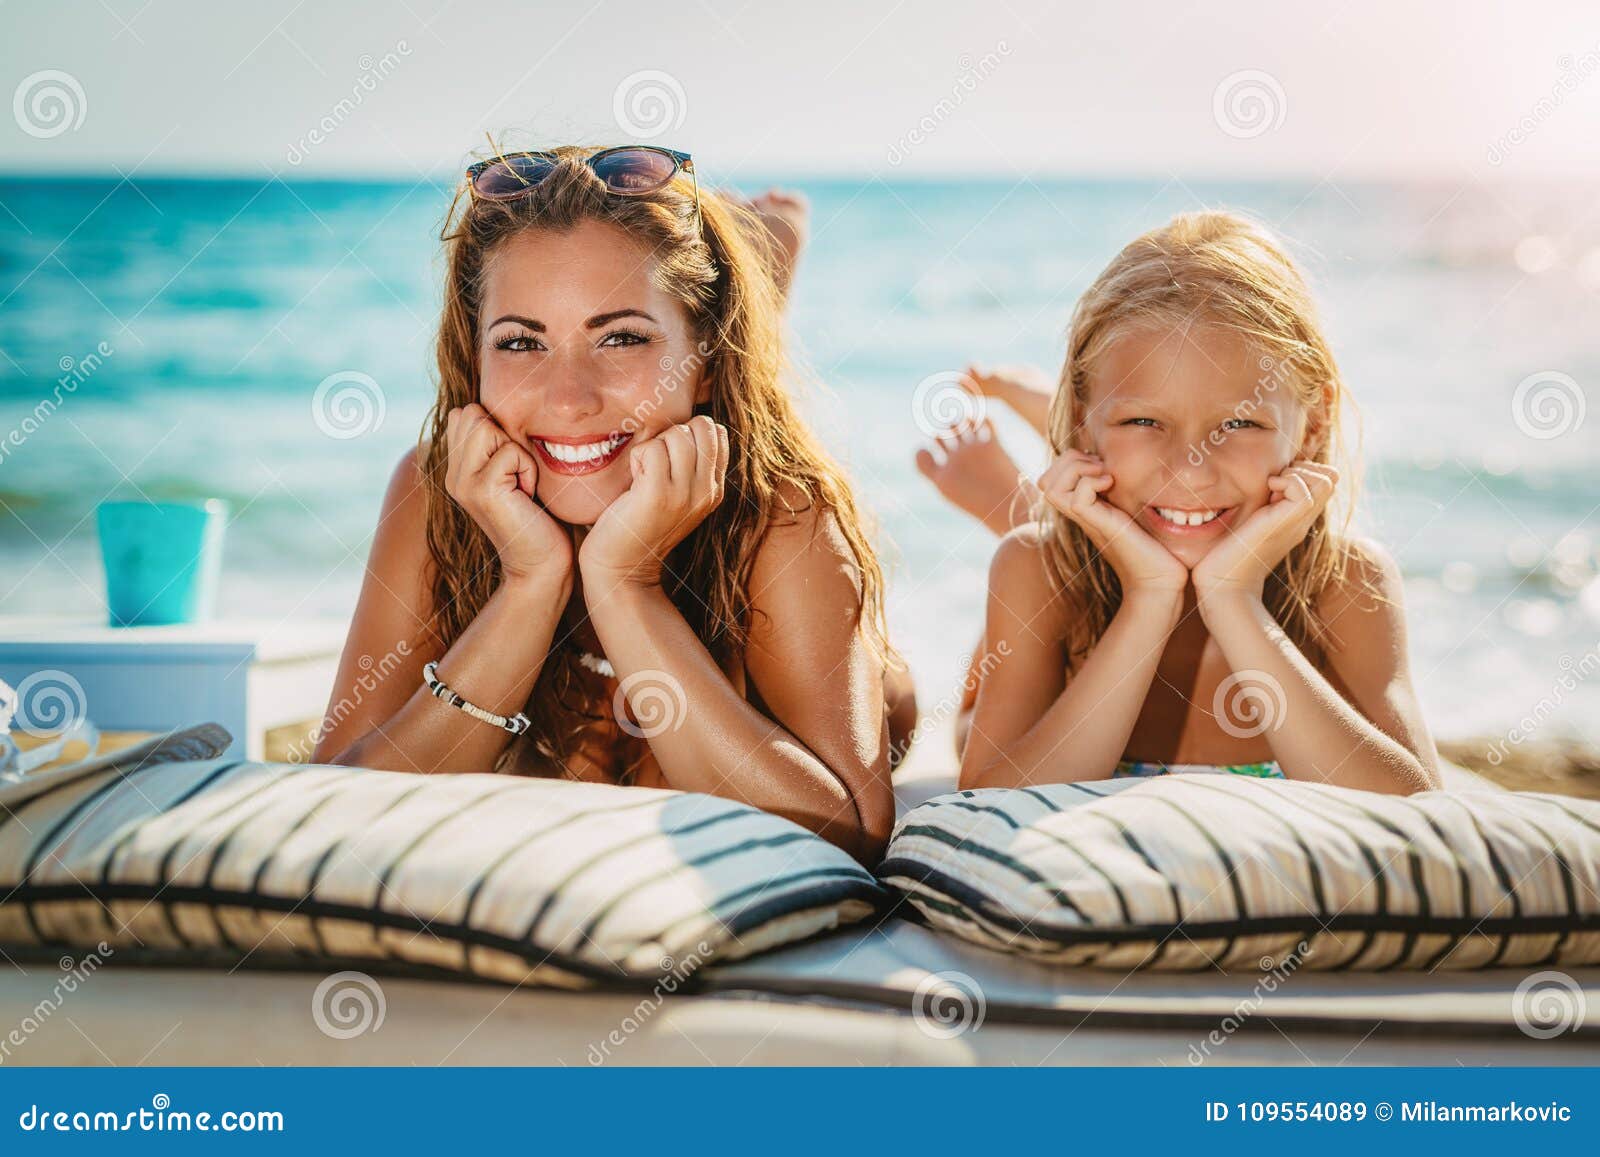 Mom And Daughter Posing At The Beach Stock Image Image Of Nature Happiness 109554089 